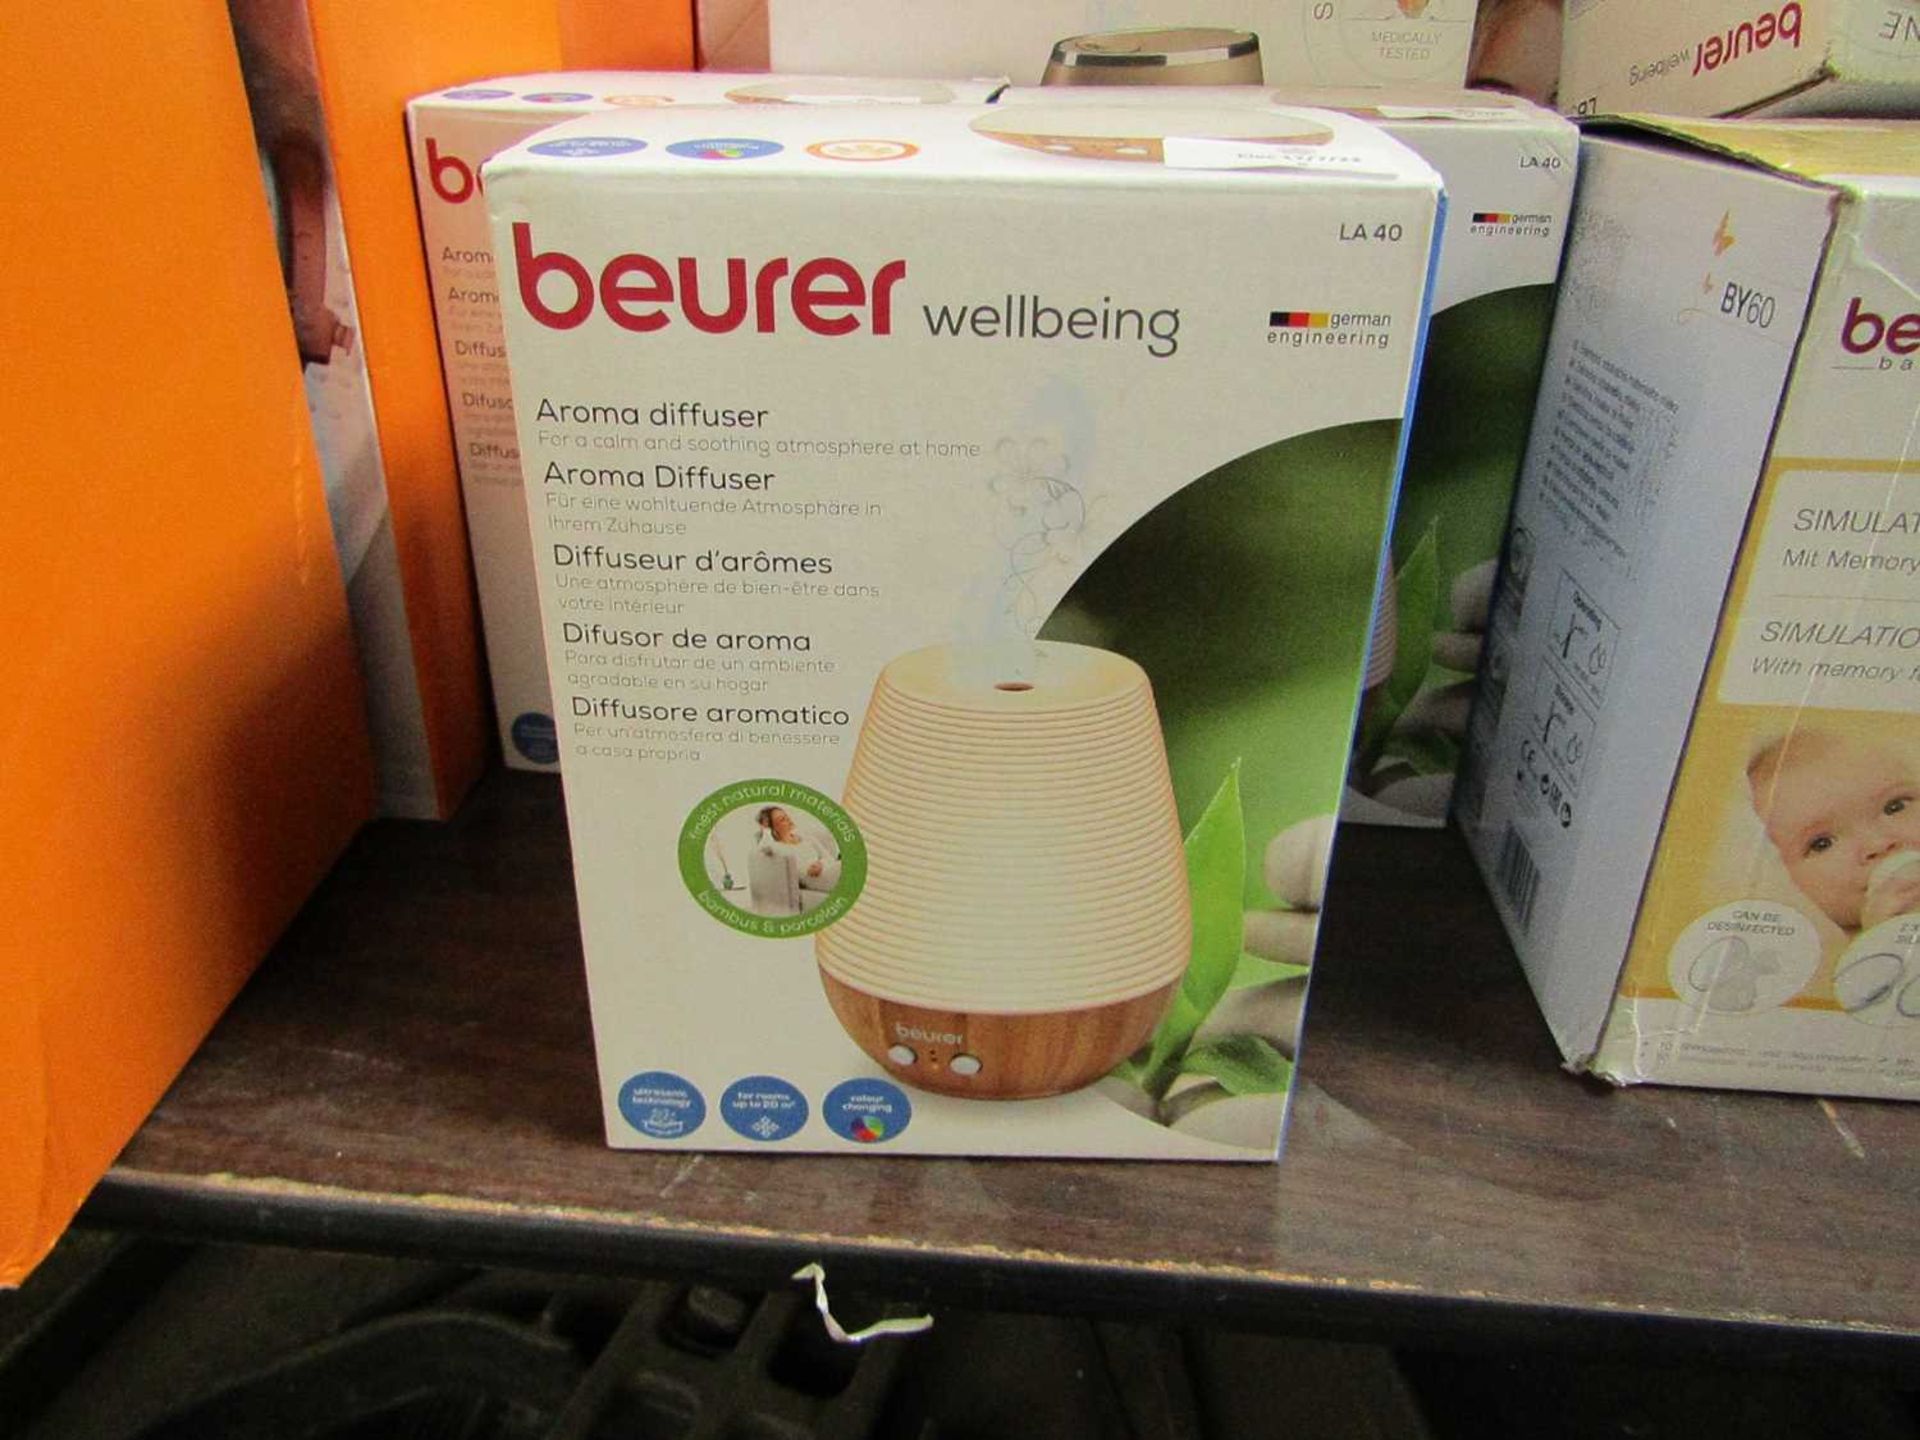 1x Beurer Wellbeing LA40 Aroma Diffuser - This item is graded B - RRP £53